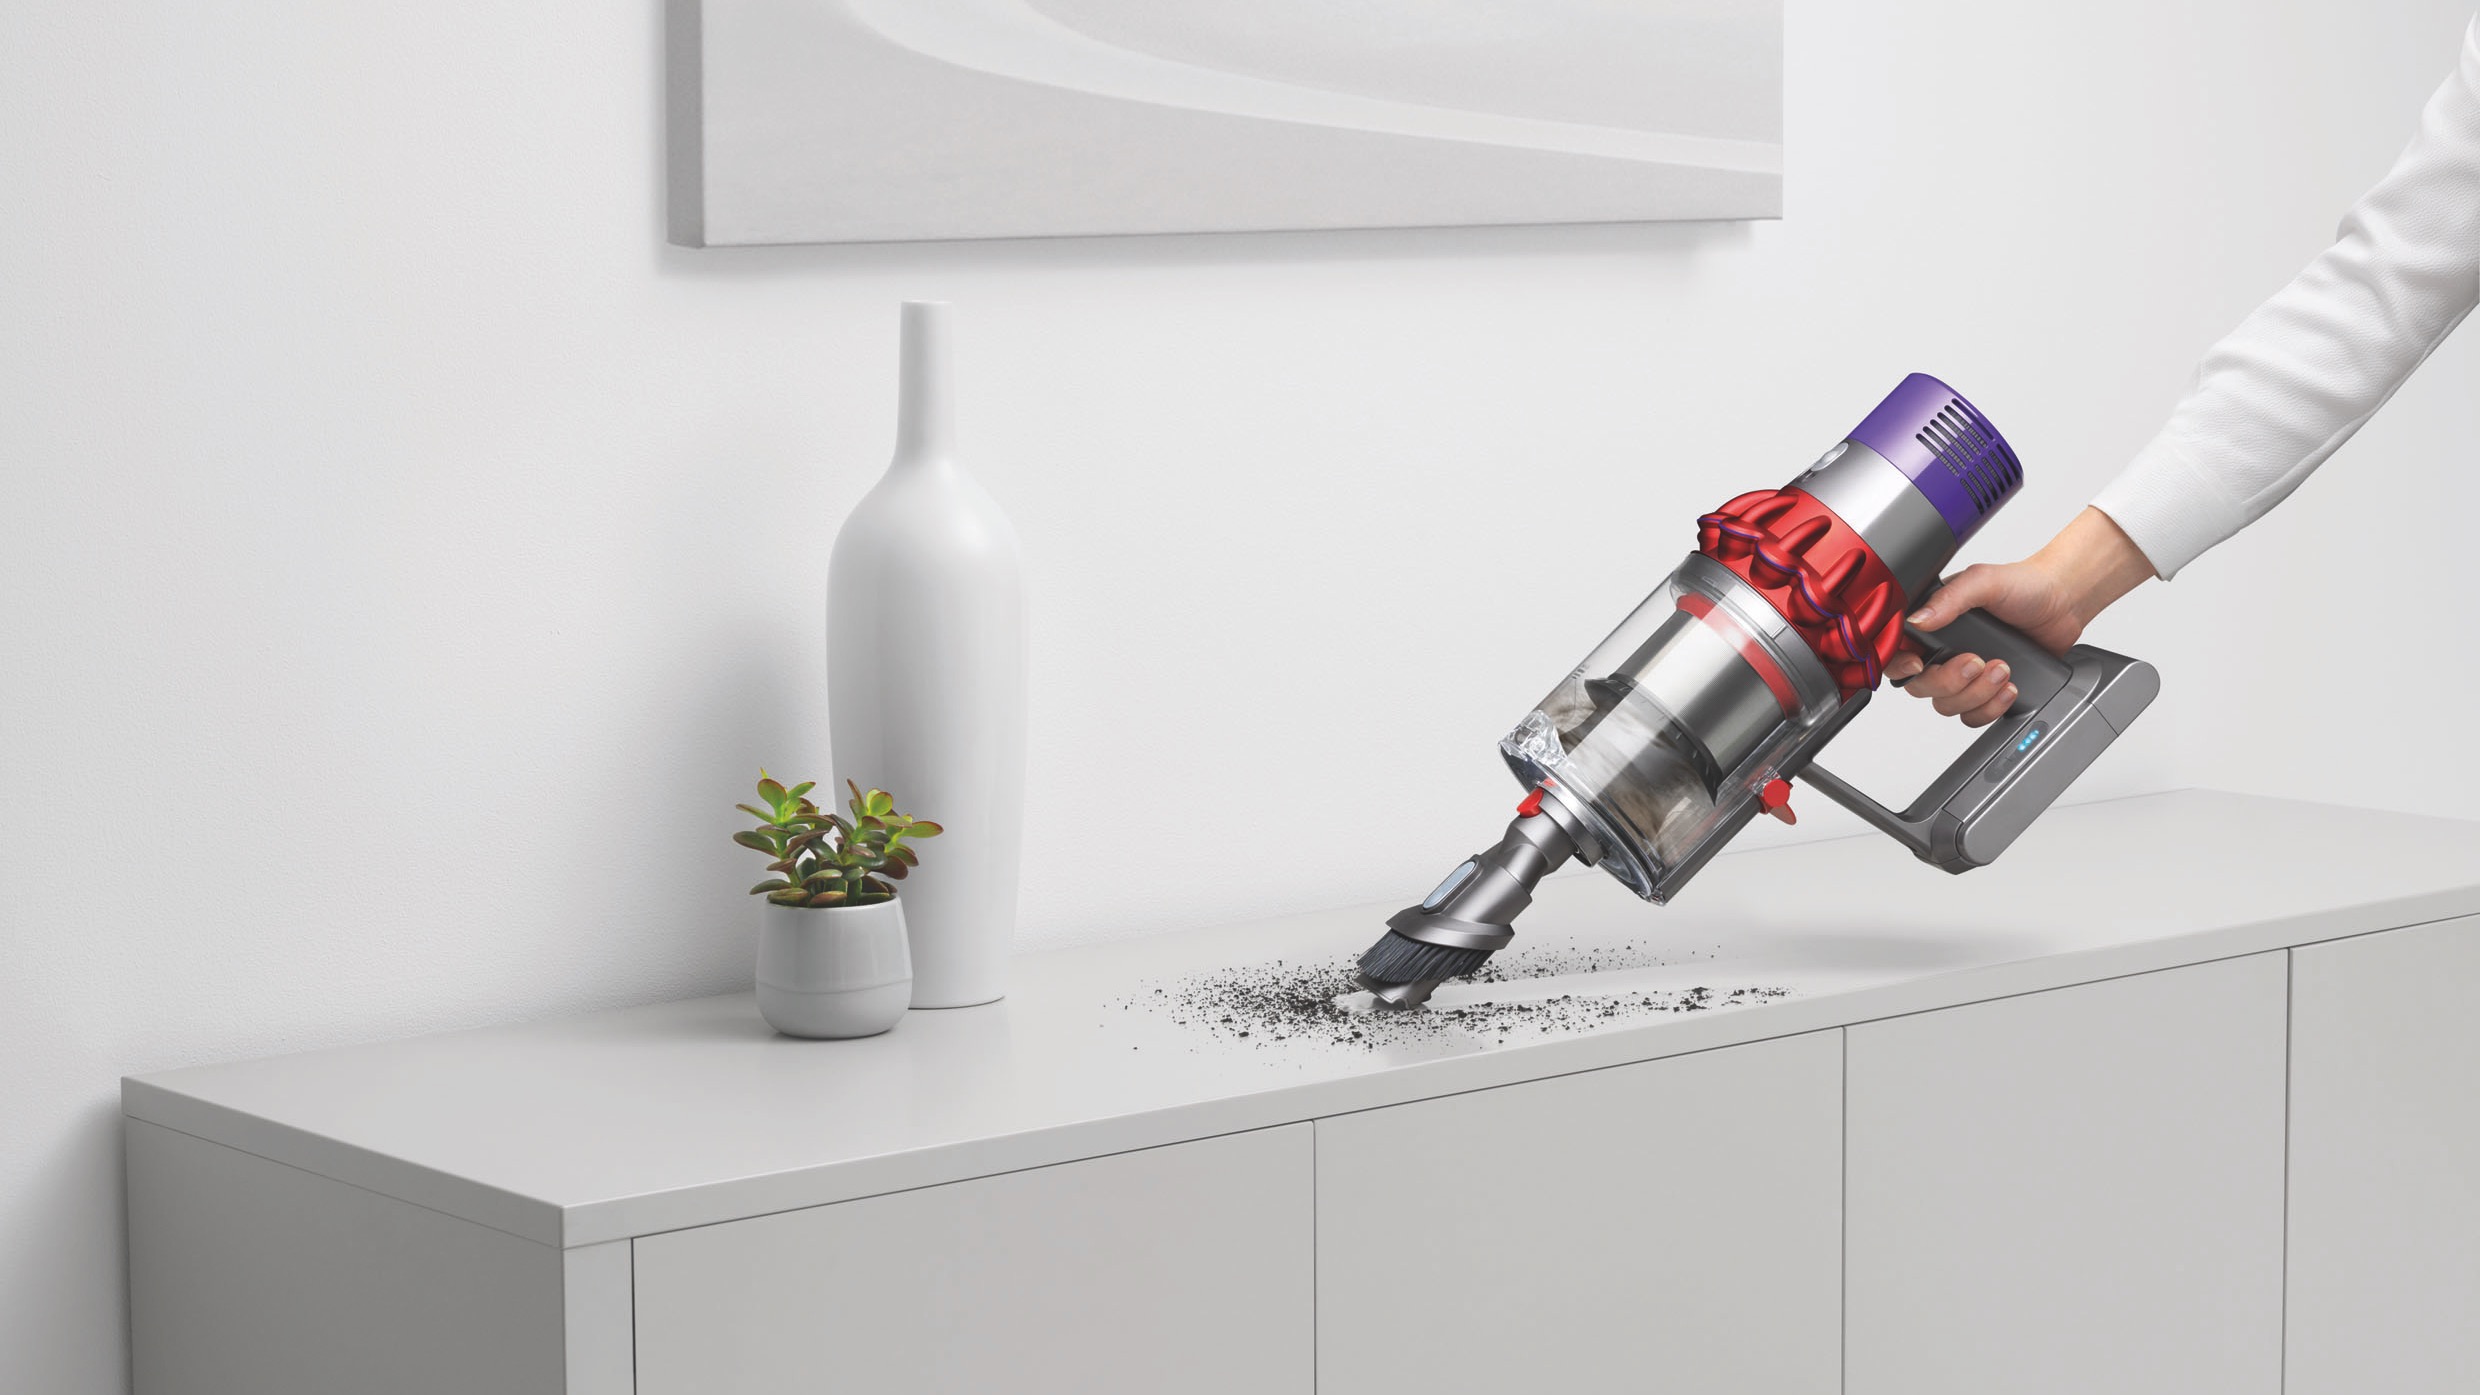 Dyson Cyclone V10 cordless vacuum cleaner